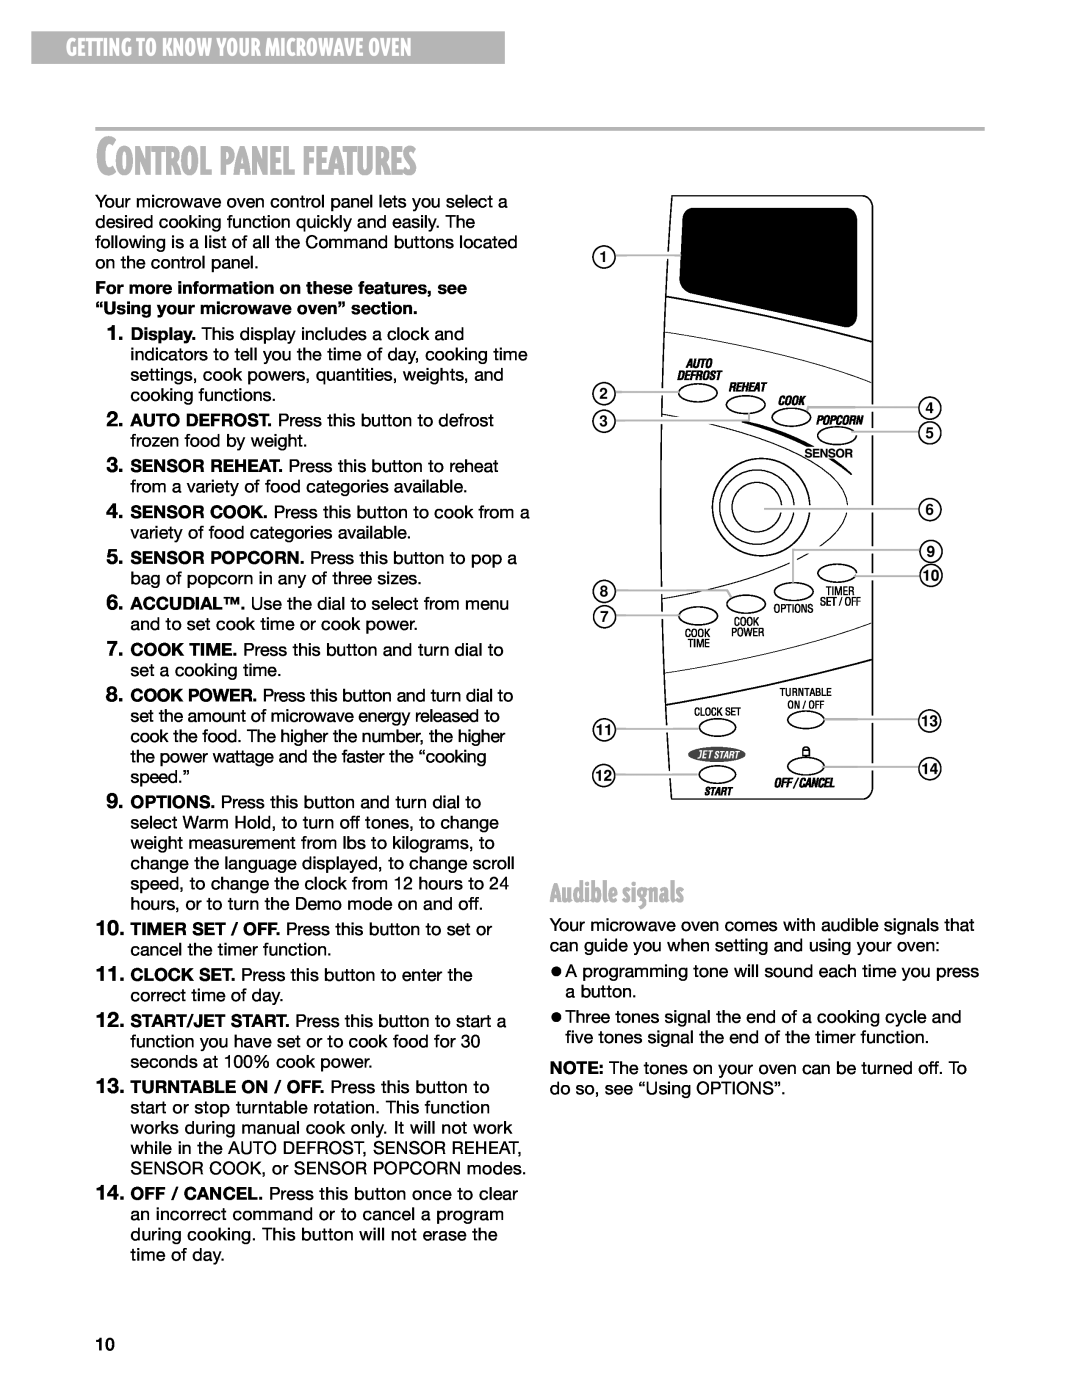 Whirlpool MT3185SH installation instructions Audible signals, Control Panel Features, Getting To Know Your Microwave Oven 